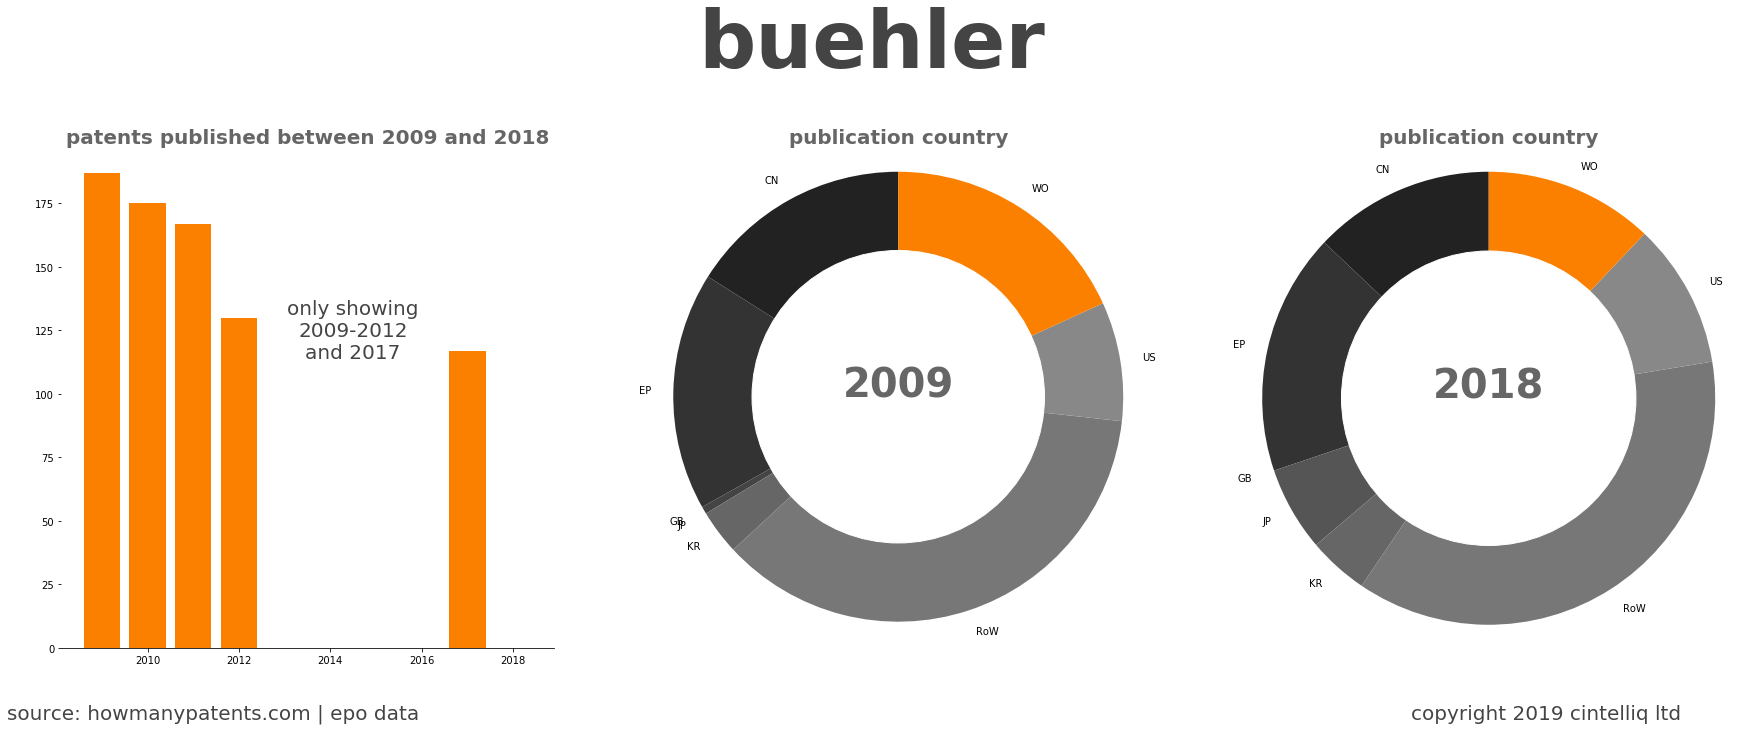 summary of patents for Buehler